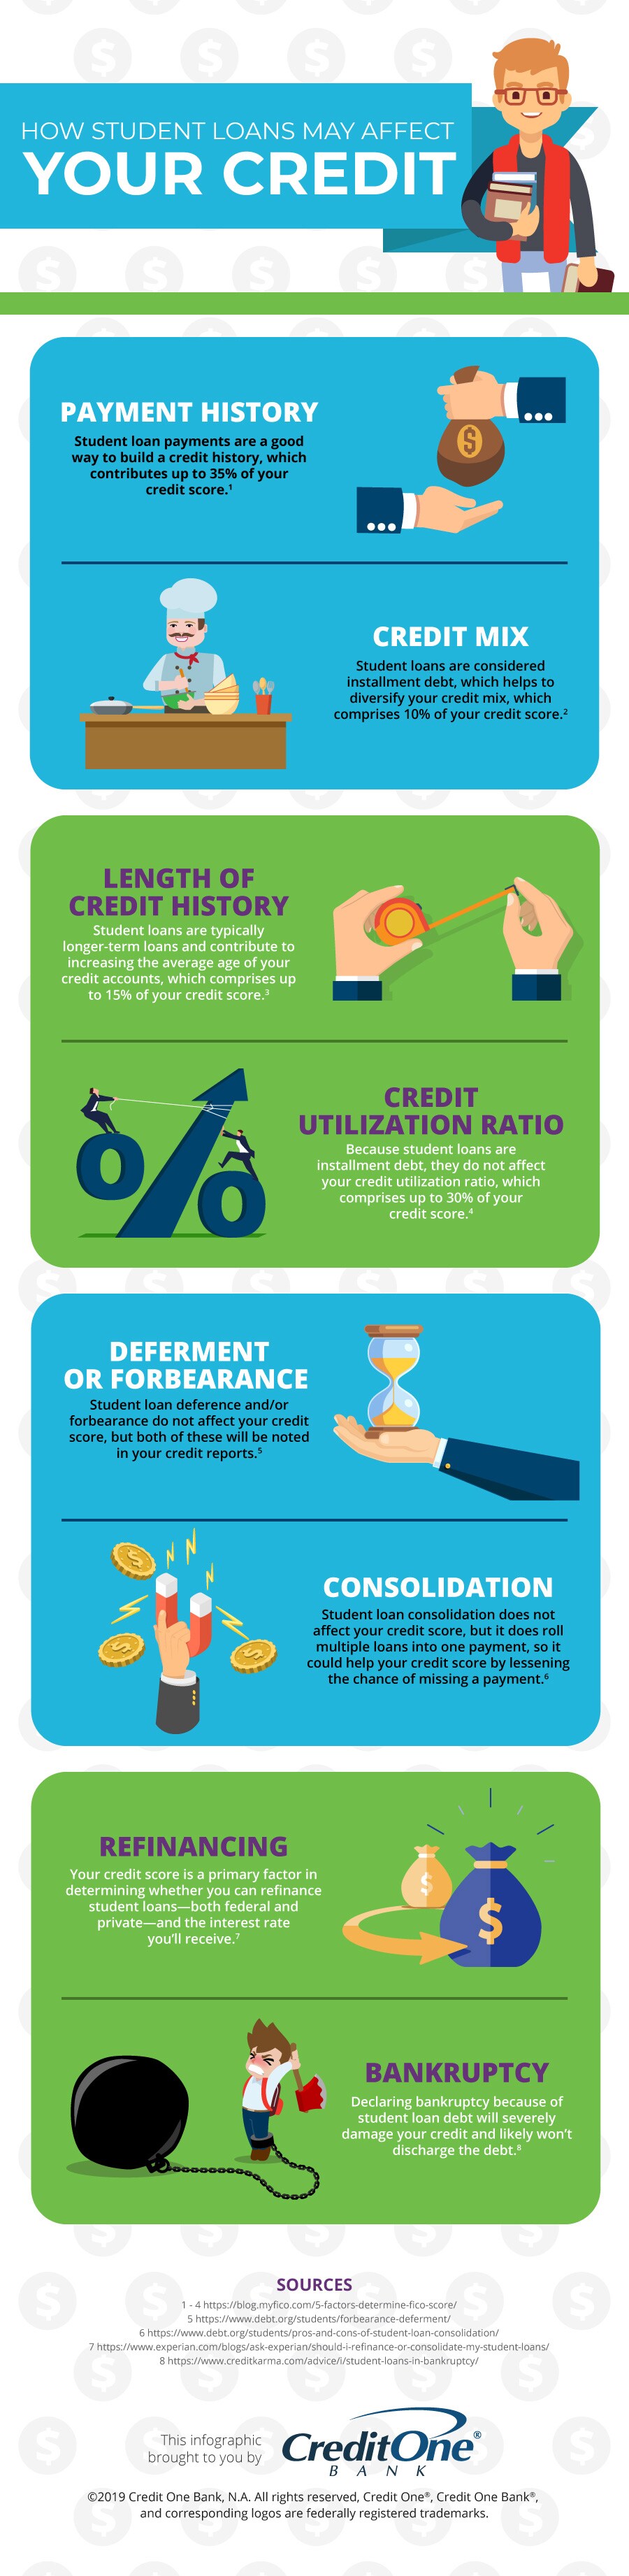 How Student Loans Affect Credit [Infographic]